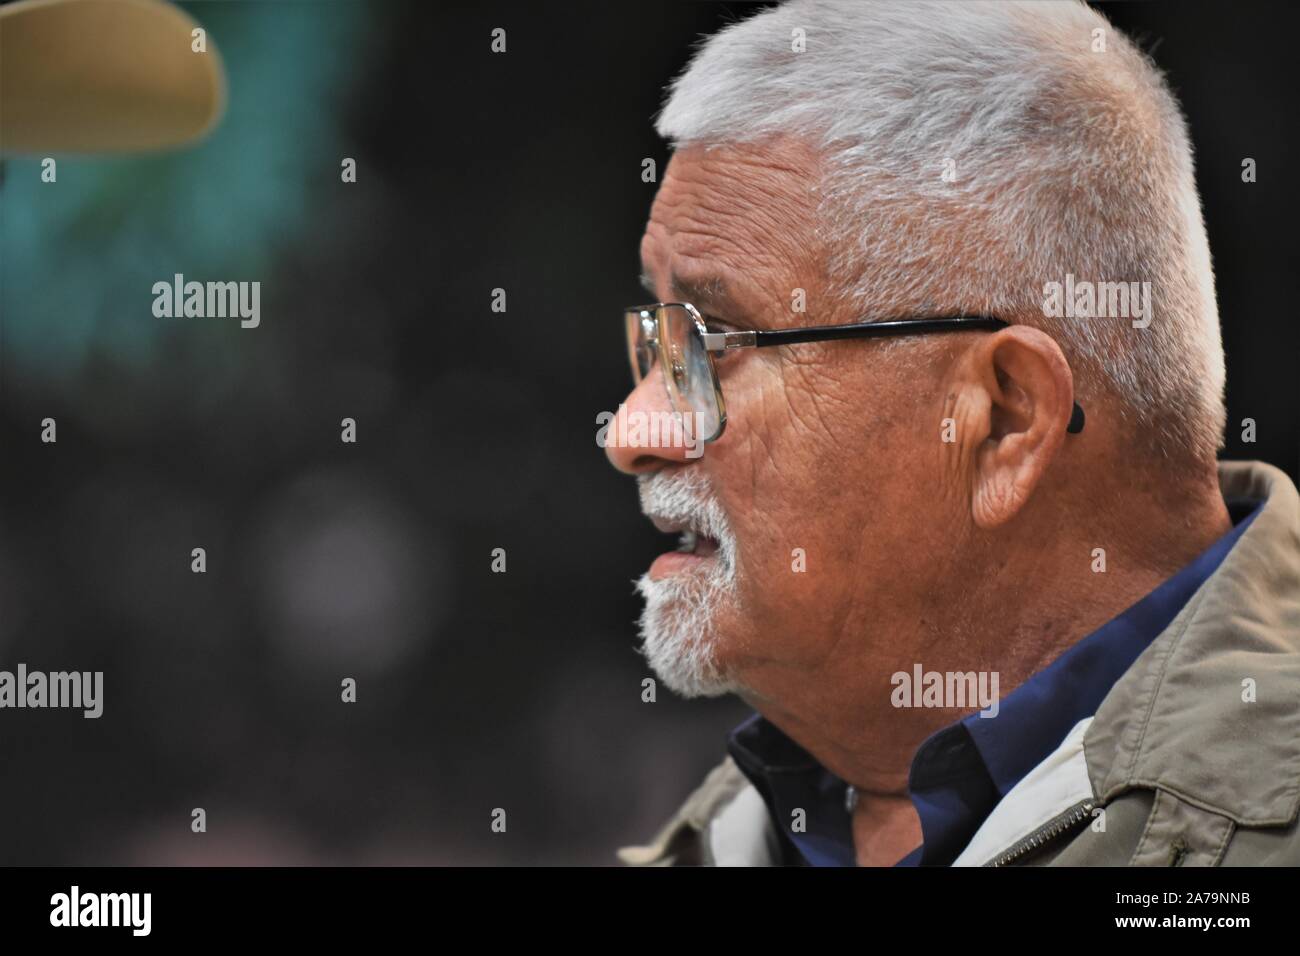 70 year old senior adult real Hispanic man with short white hair and glasses with a goatee Stock Photo